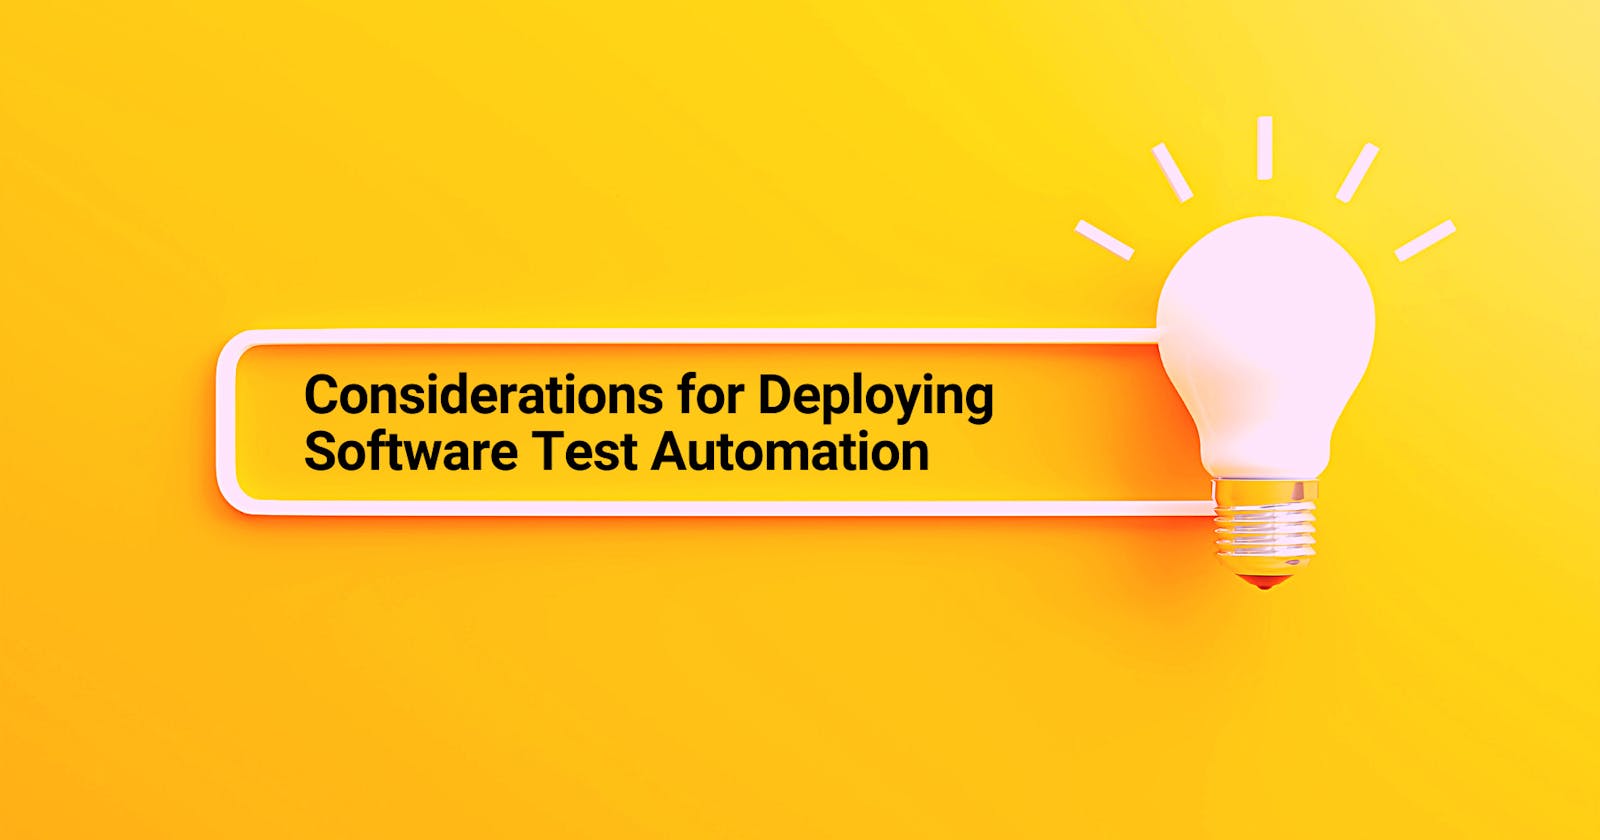 Considerations for Deploying Software Test Automation